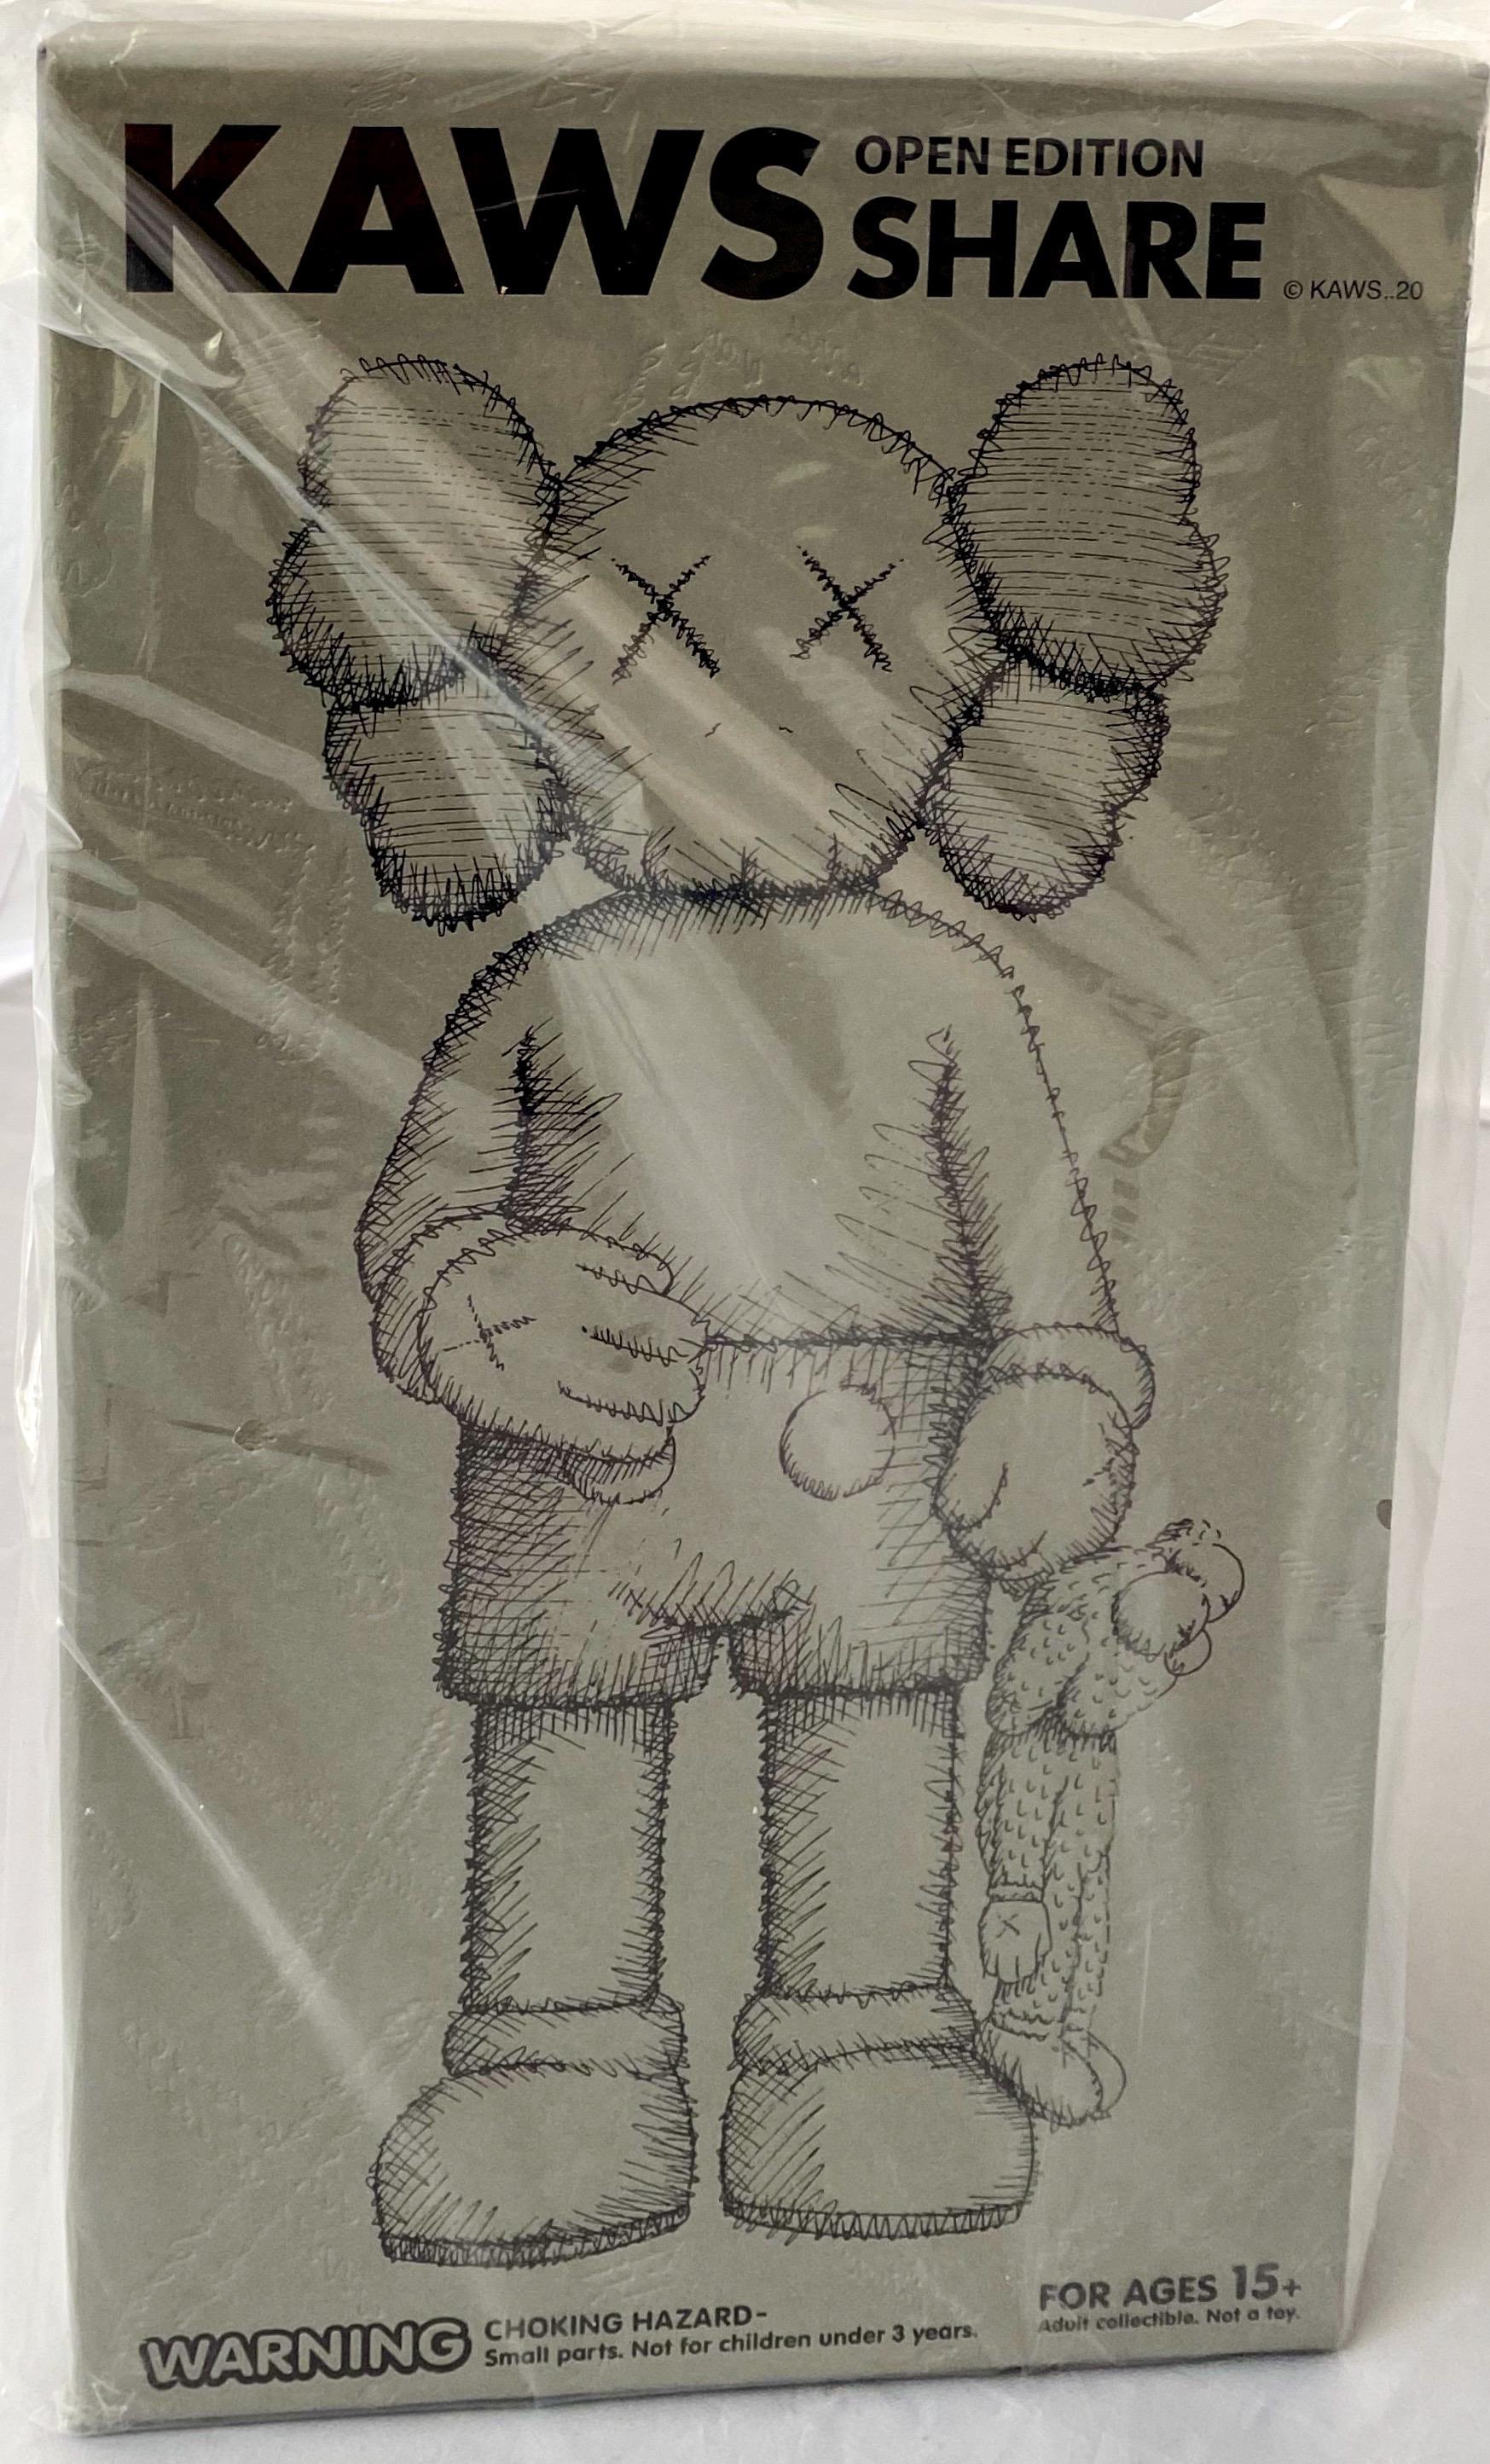 KAWS SHARE (Grey), new & unopened in its original packaging. 
KAWS SHARE first appeared in 'BLACKOUT' – the first London solo exhibition by KAWS (Skarstedt London 2019). In SHARE, KAWS uses two of his characters to convey opposing human attitudes.